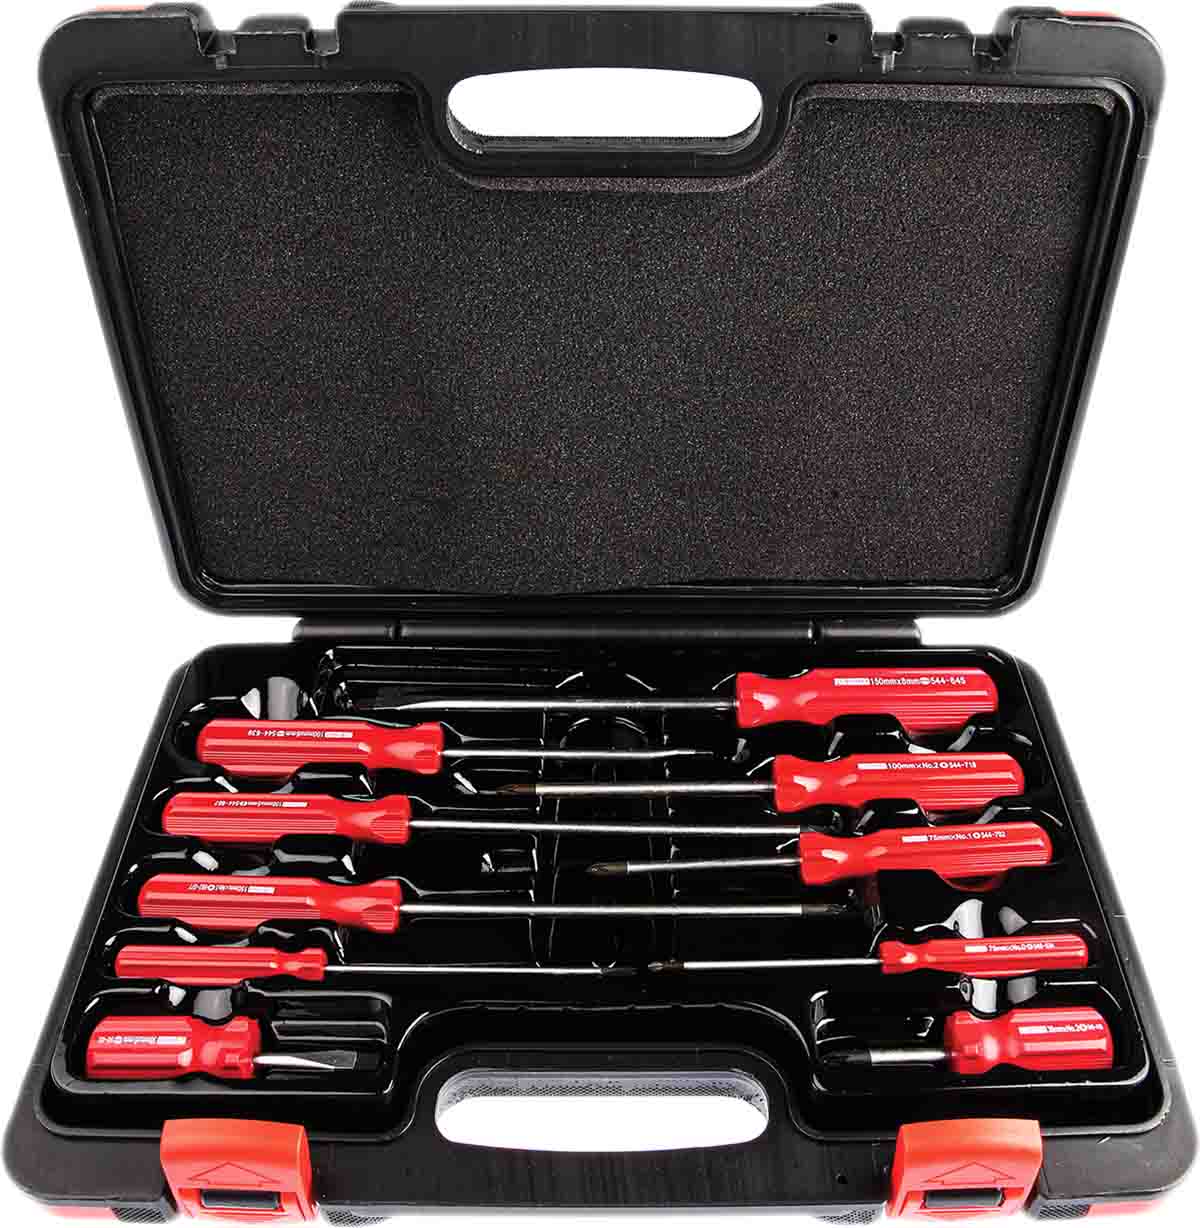 RS PRO Engineers Slotted Flared' Pozidriv Screwdriver Set 10 Piece